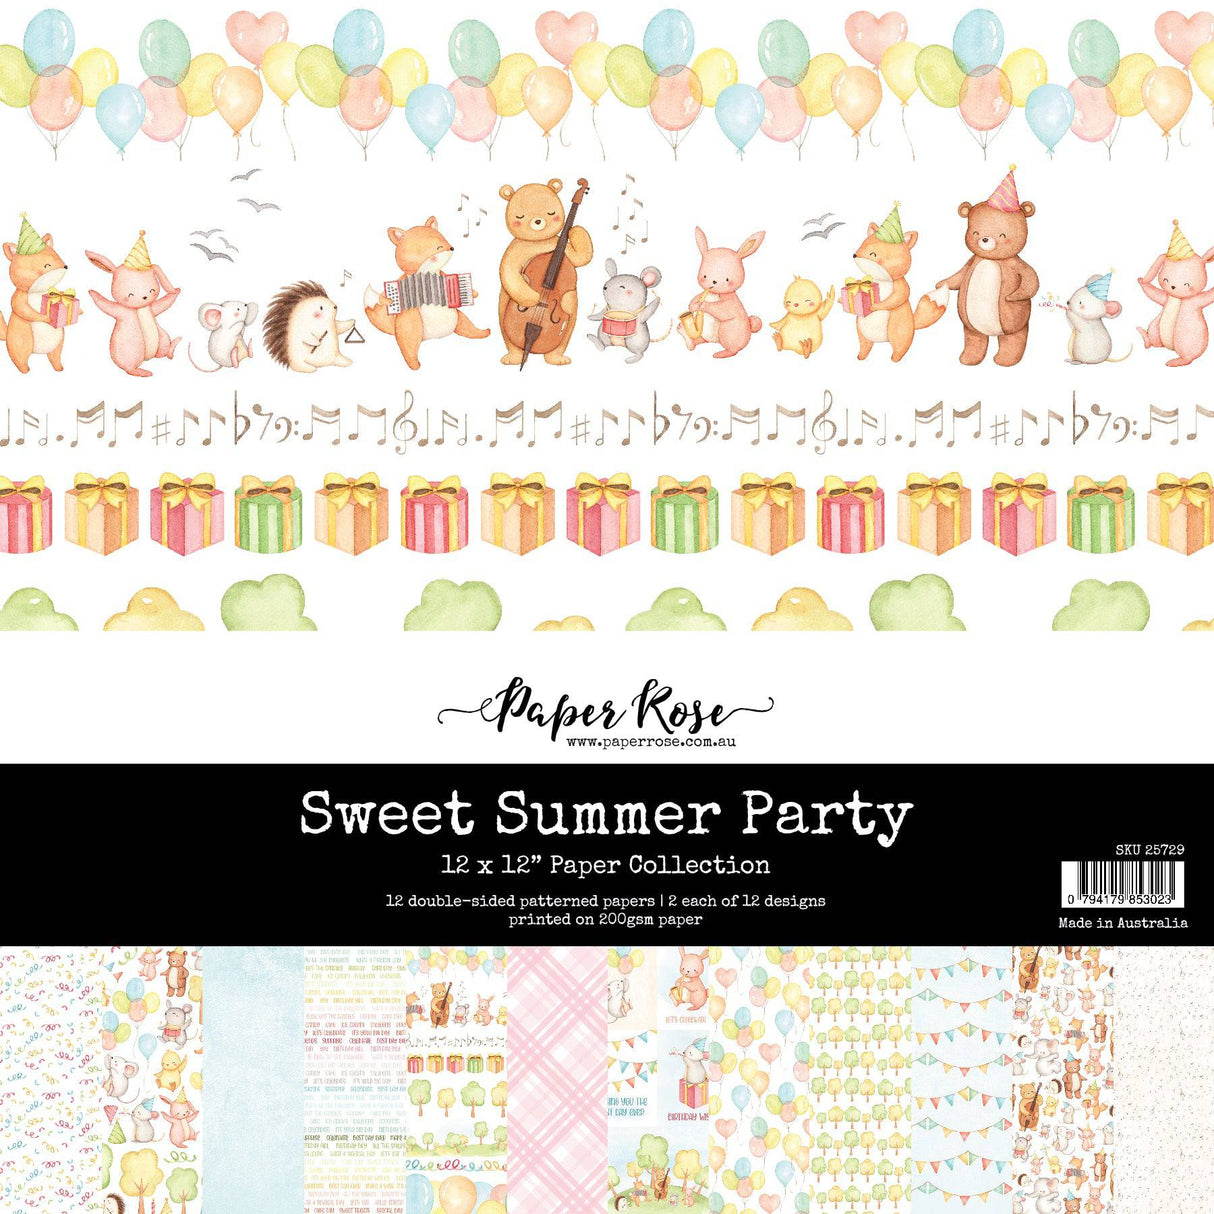 Sweet Summer Party 12x12 Paper Collection 25729 - Paper Rose Studio